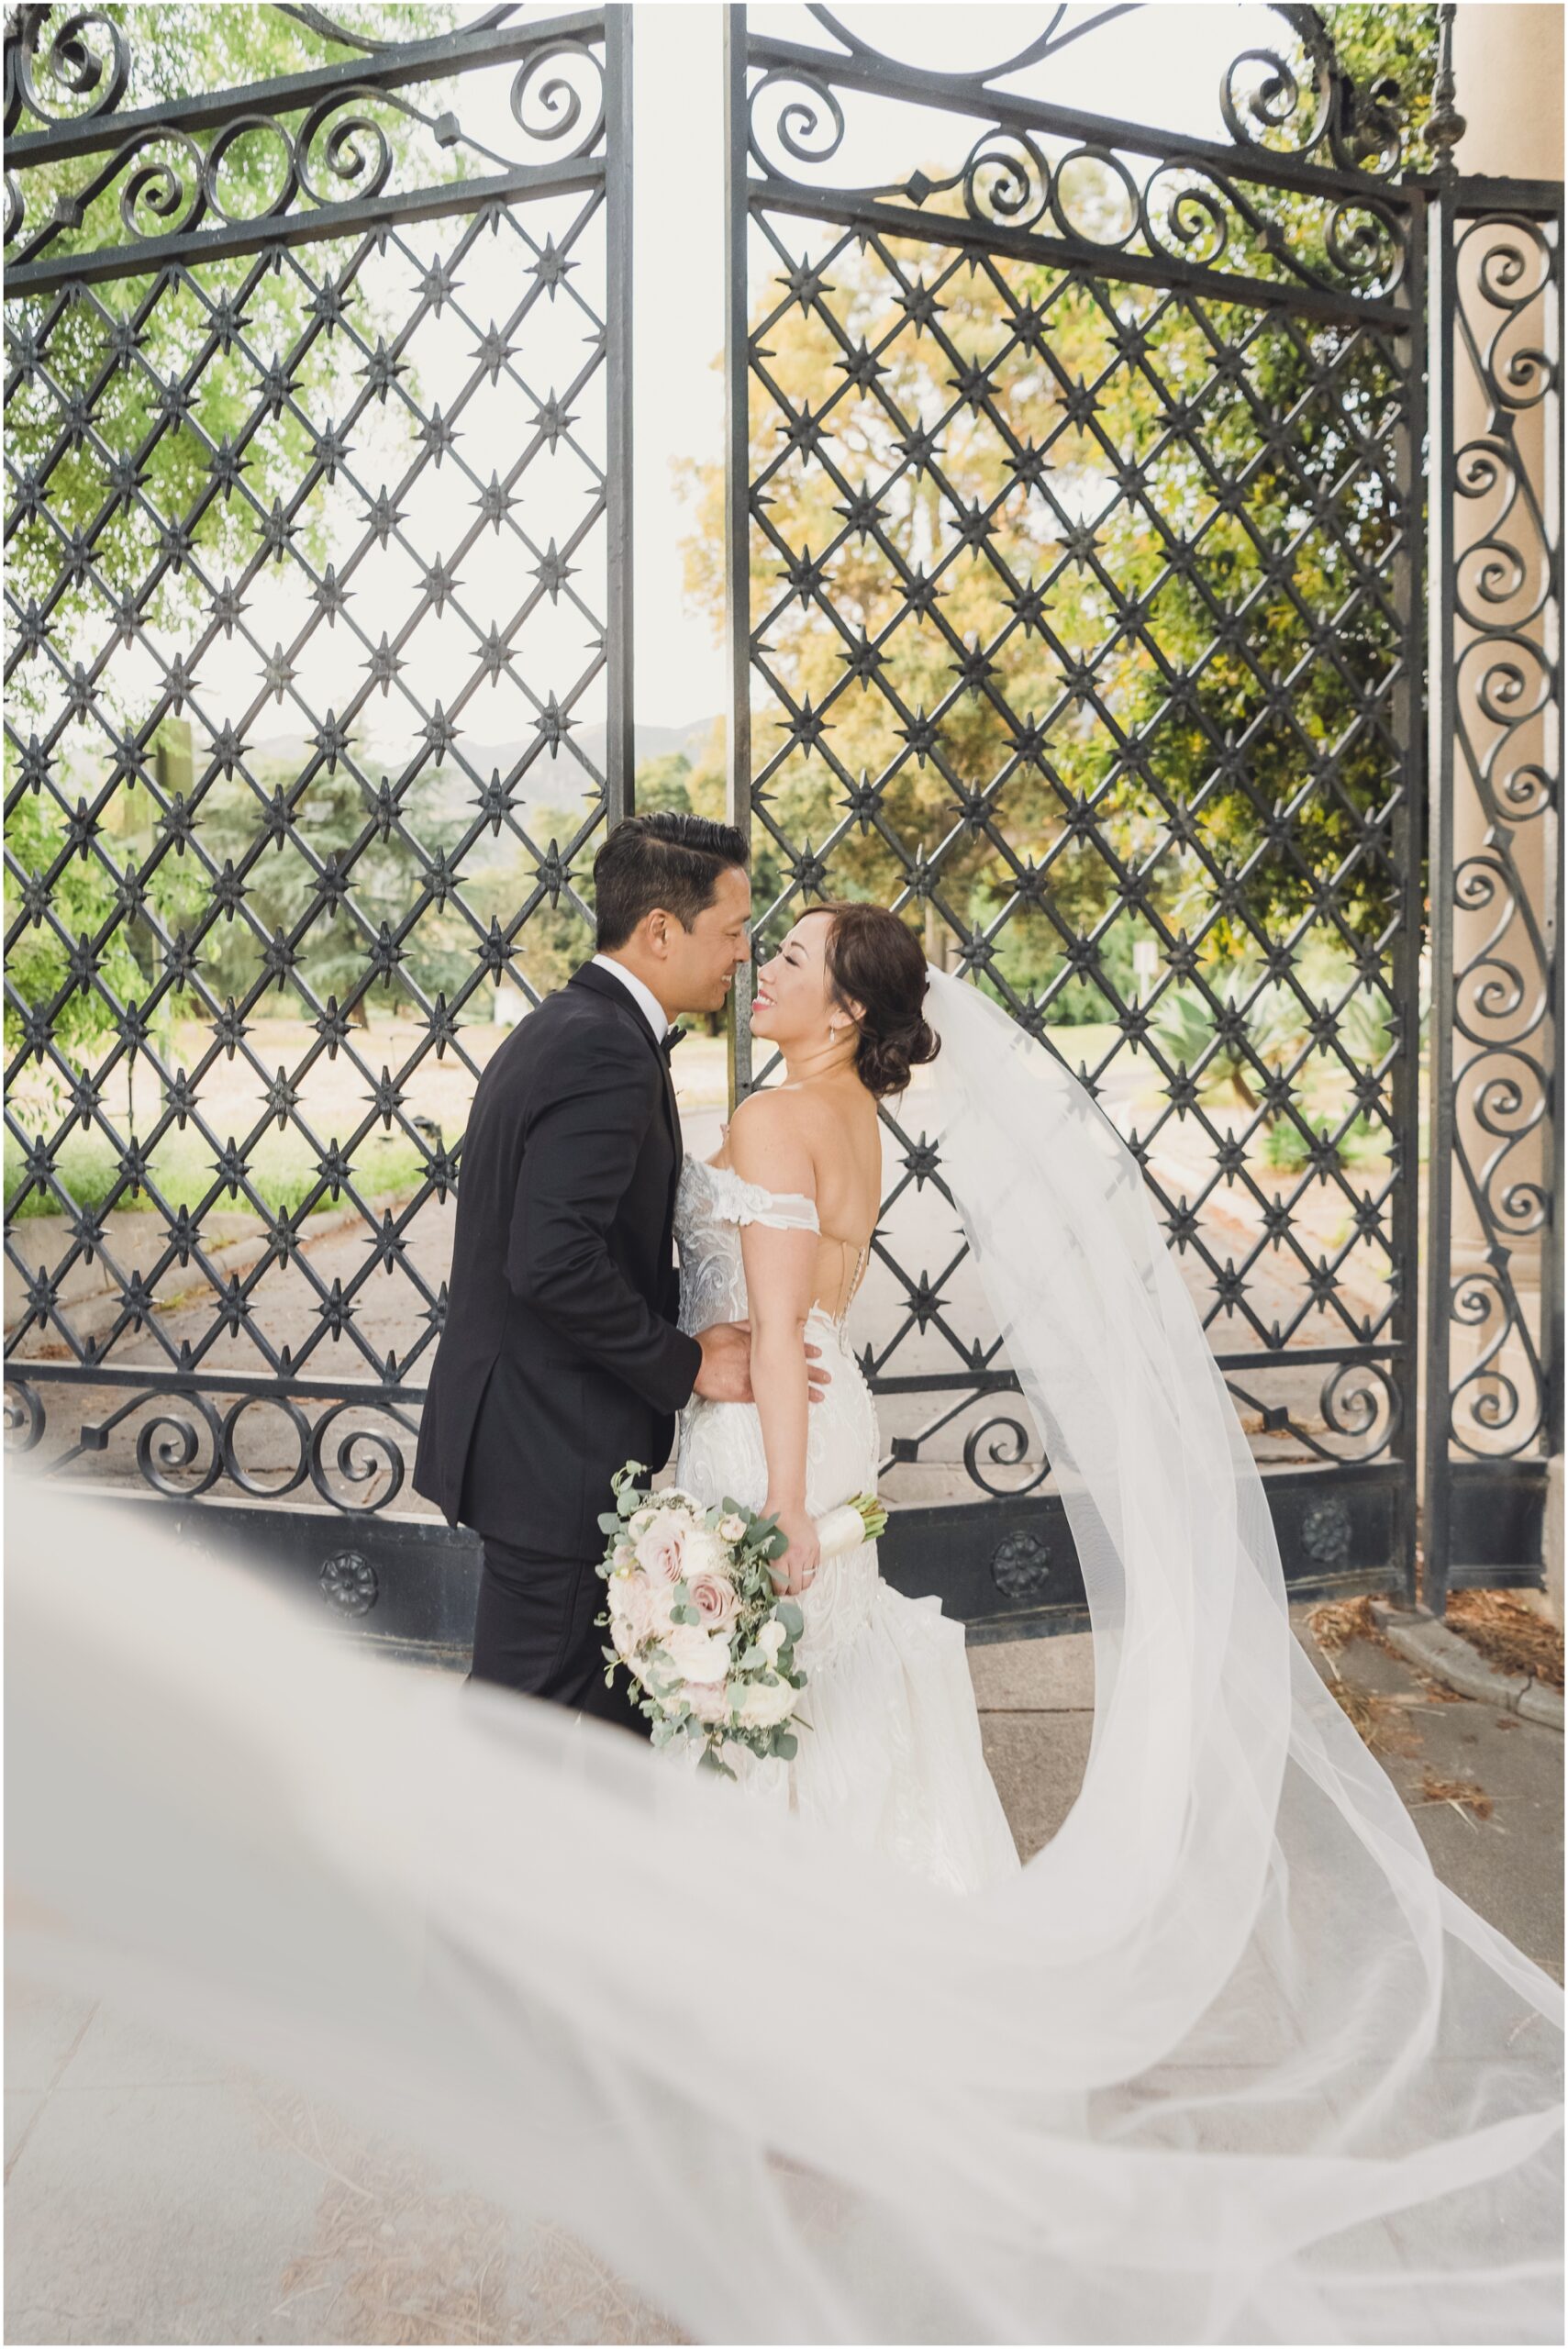 A bride and groom stand at the gate of Villa del sol d'oro in sierra madre